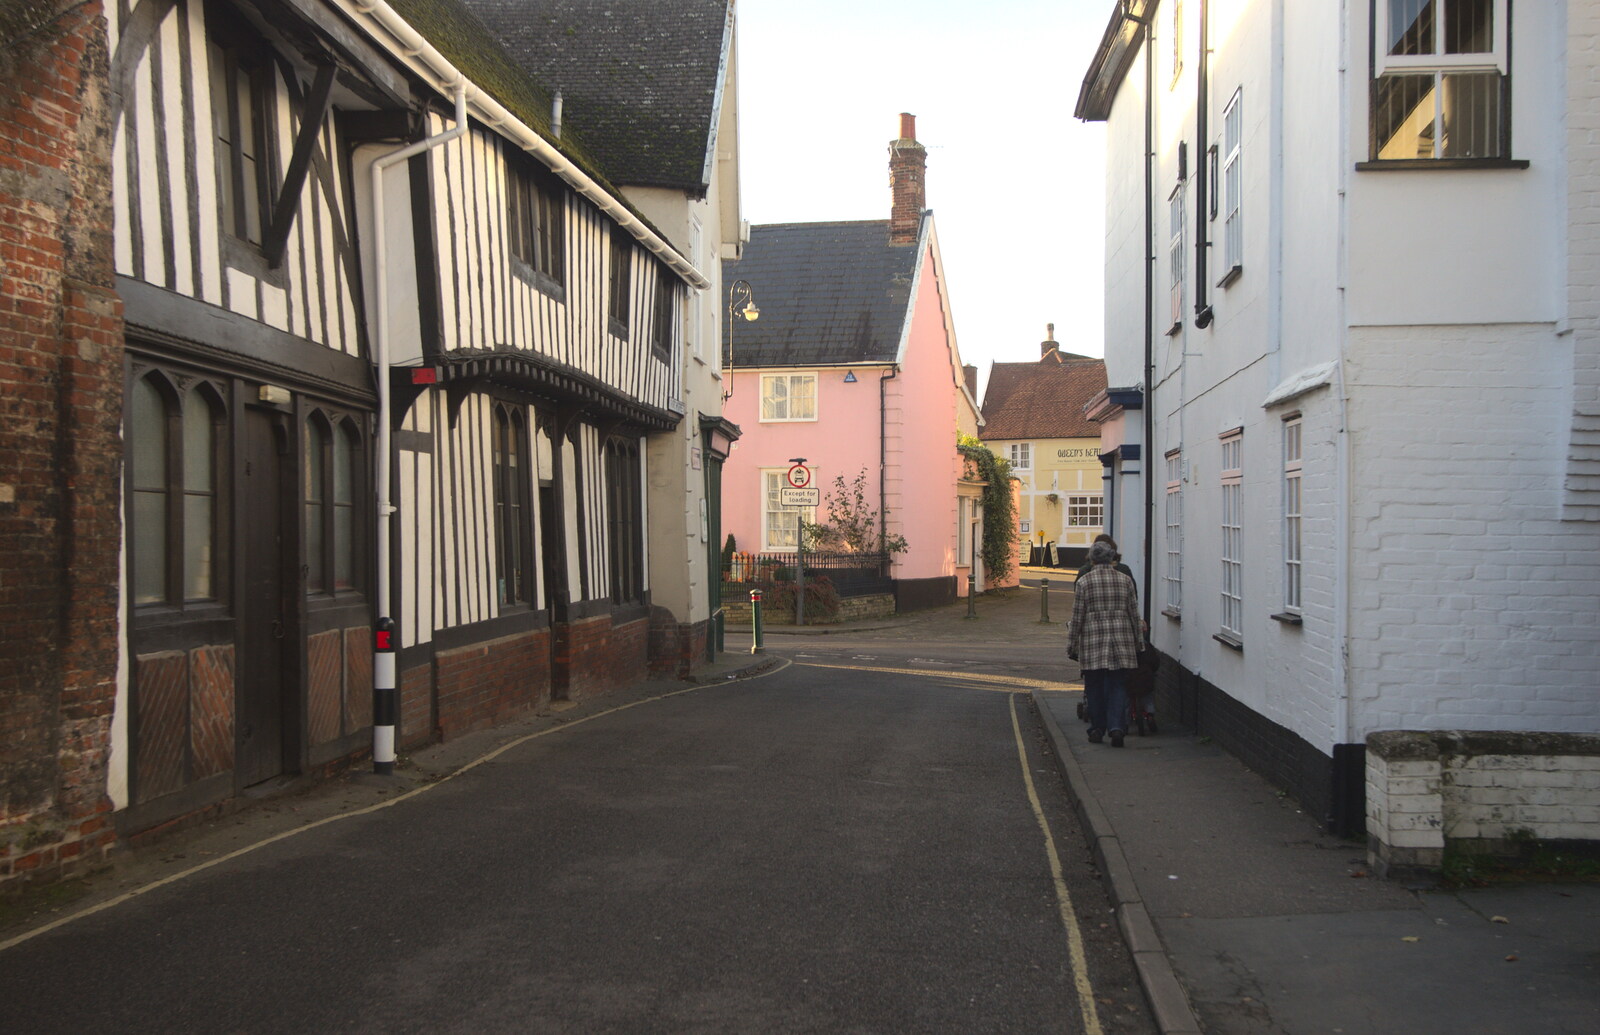 Church Street in Eye from Sis Comes to Visit, Eye, Suffolk - 18th November 2012